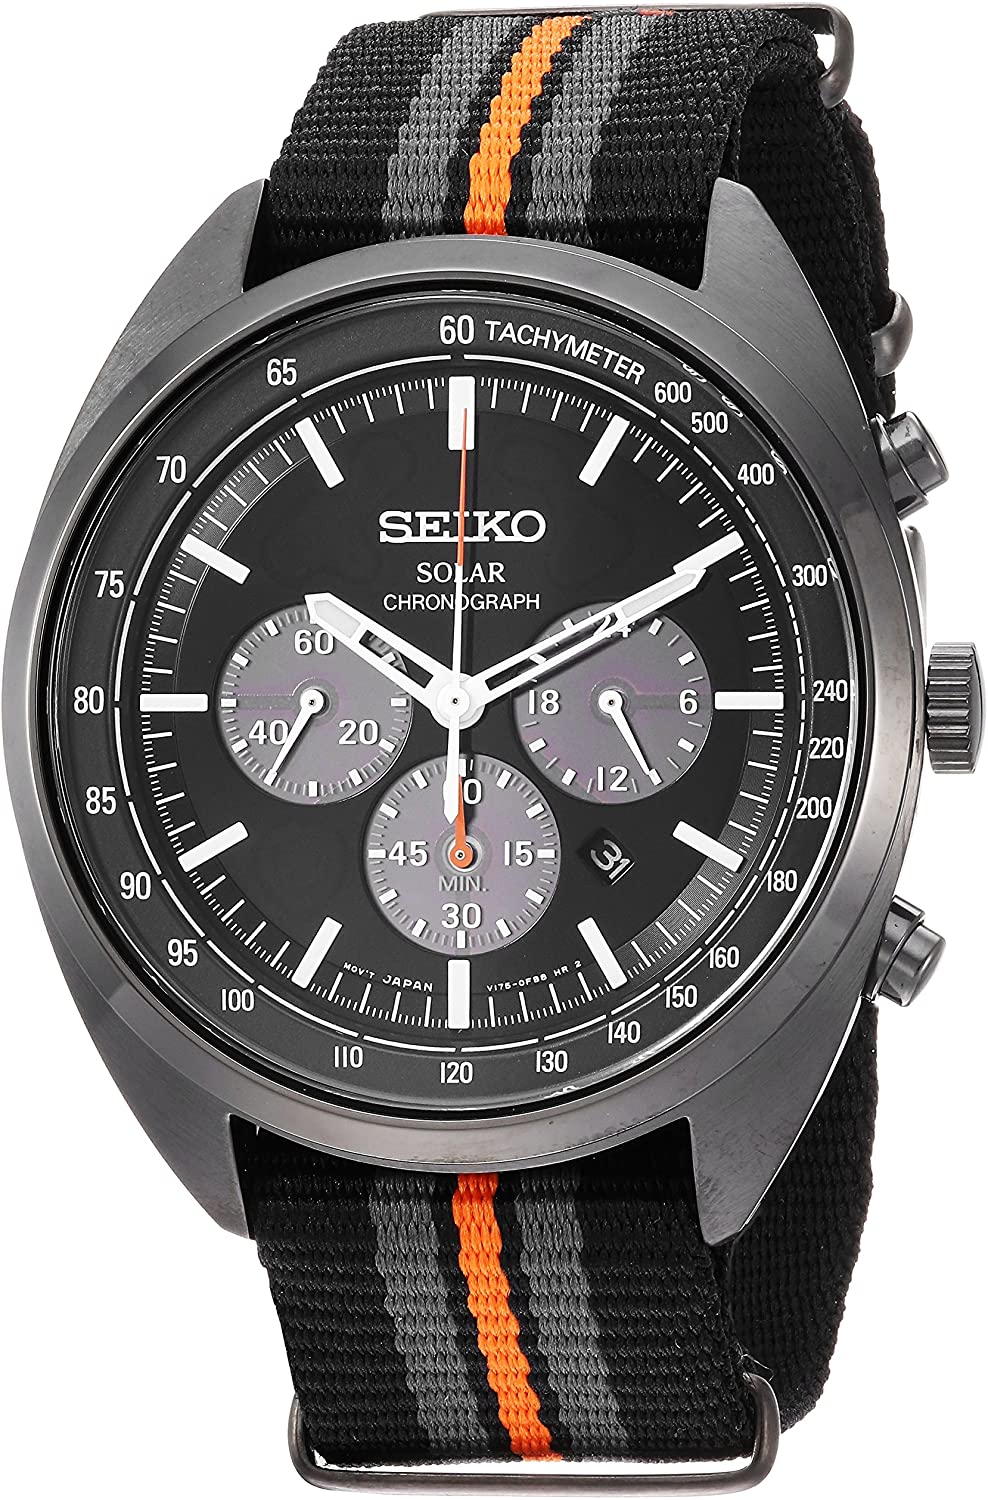 Seiko Recraft SSC669 Review & Complete Guide - Millenary Watches